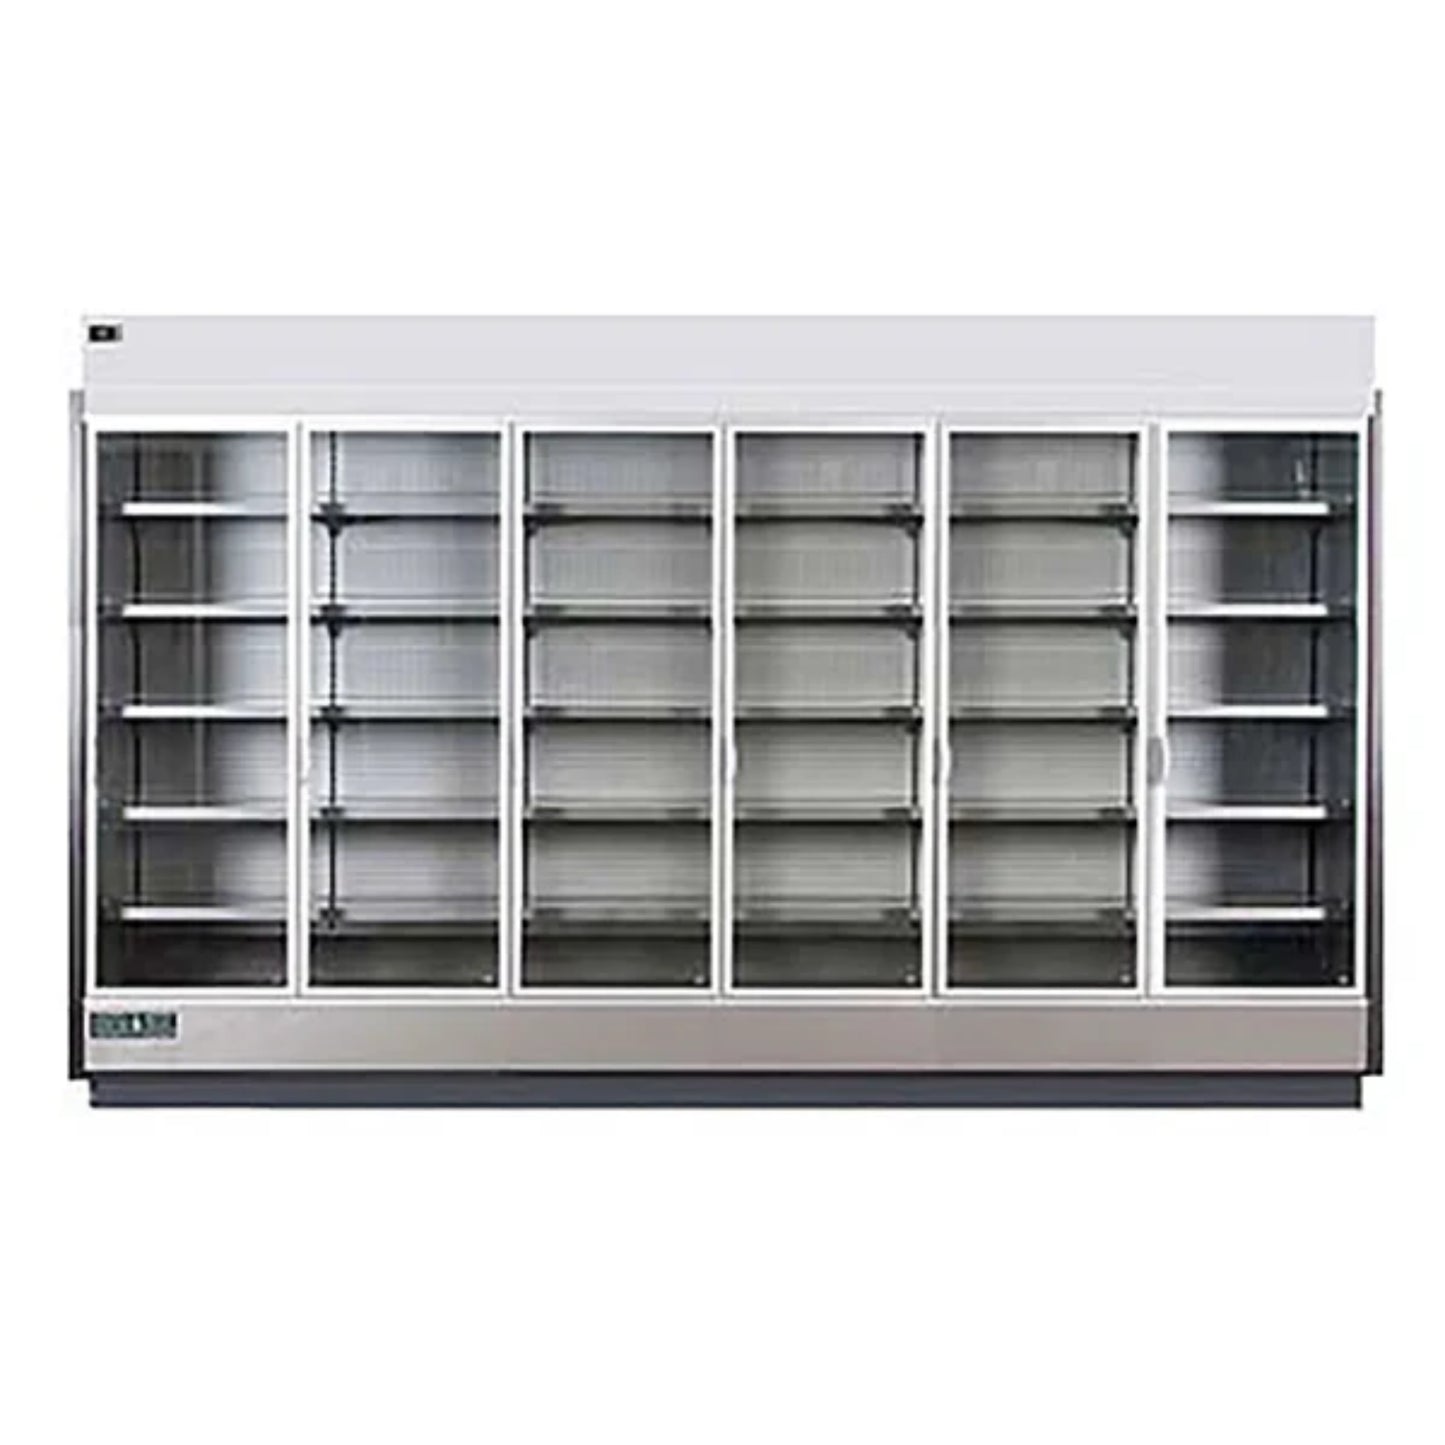 Hydra-Kool KGV-MR-6-S 6-Door High Volume Grab And Go Self-Contained